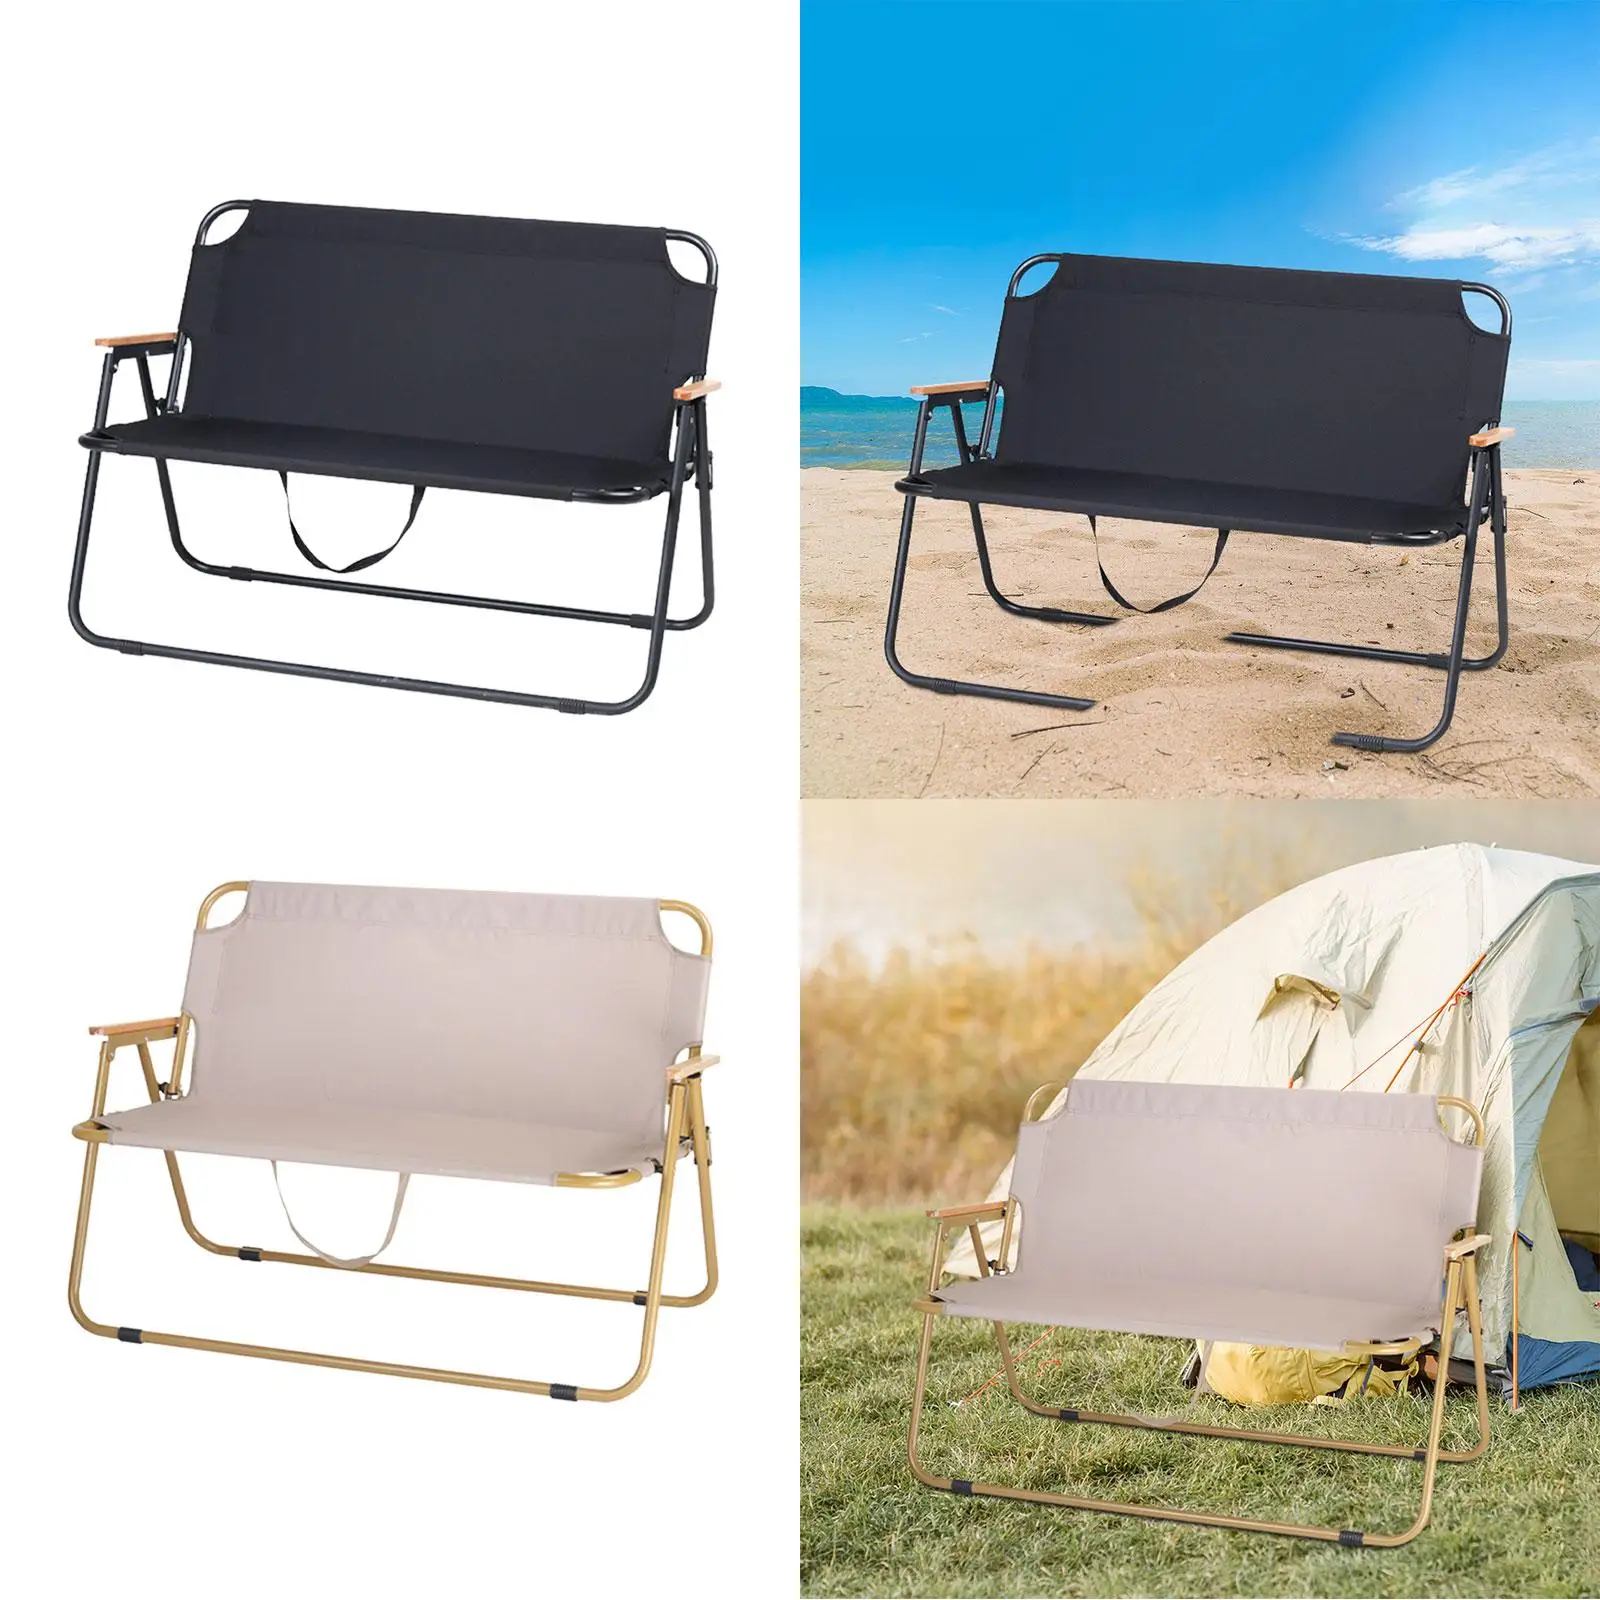 Folding Camping Chair Camping Stool Chair Adult Patio Outdoor Traveling Lightweight Double Chair Fishing Camp Chair Armchair